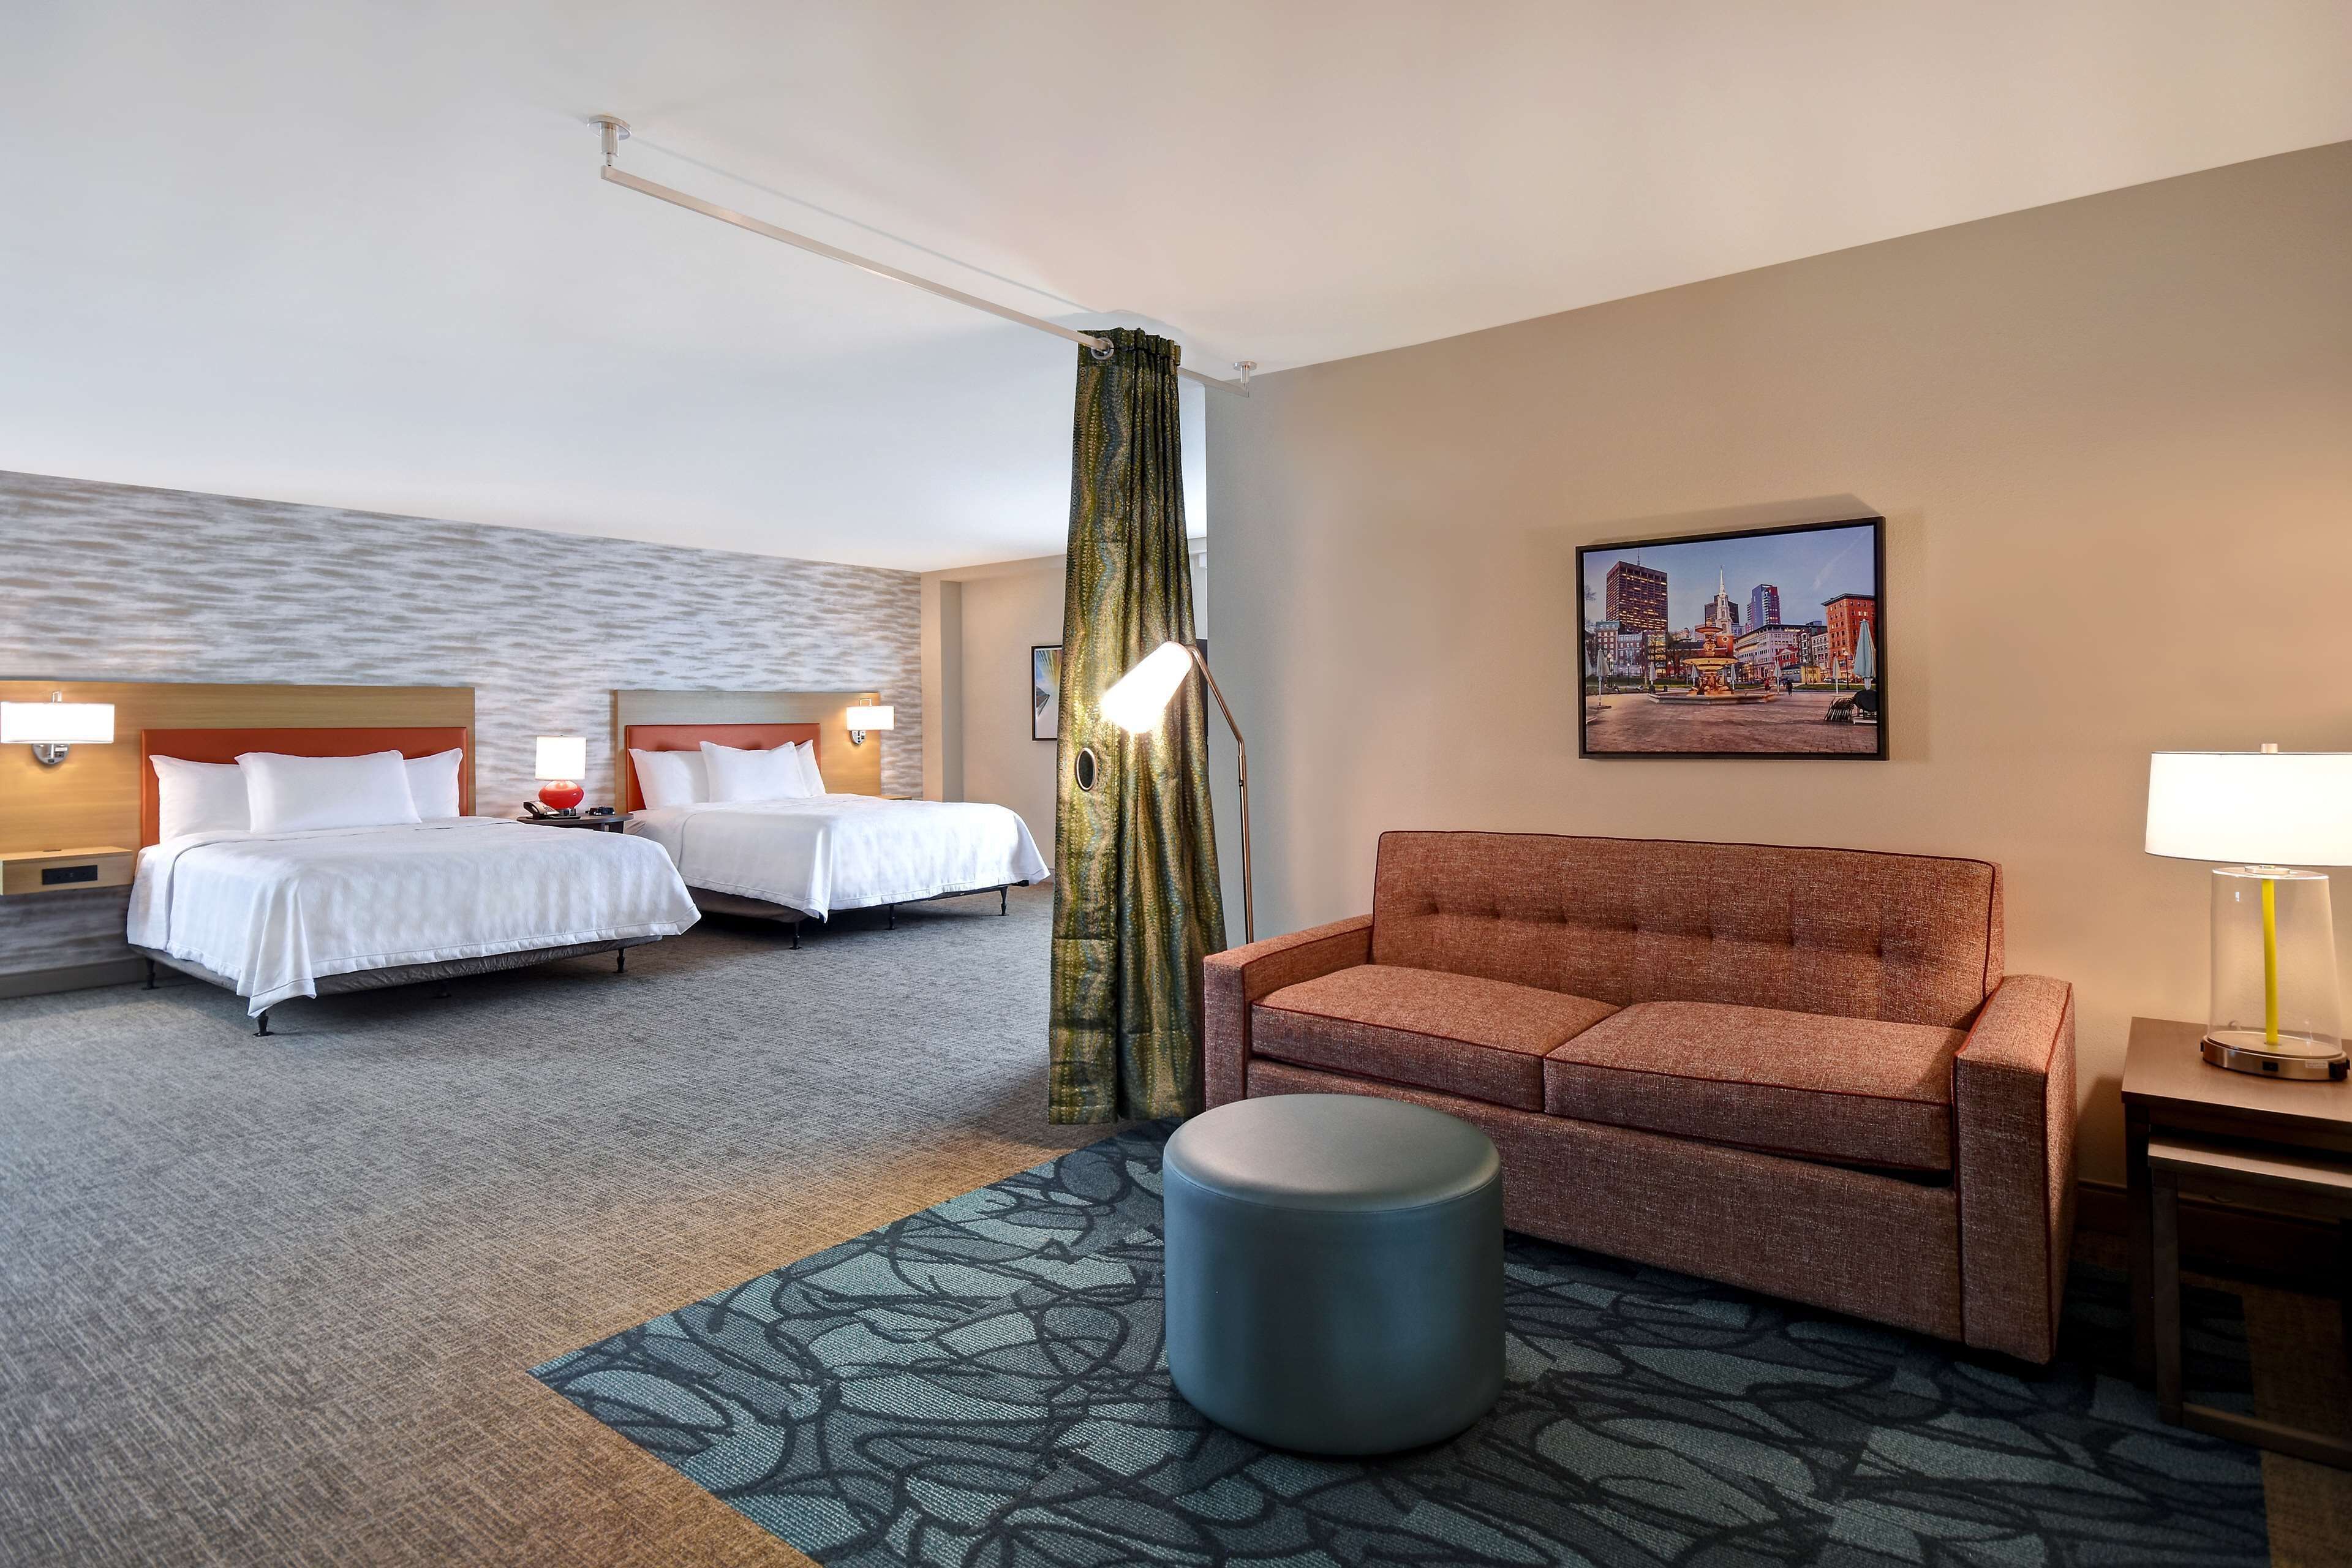 Home2 Suites by Hilton Boston South Bay